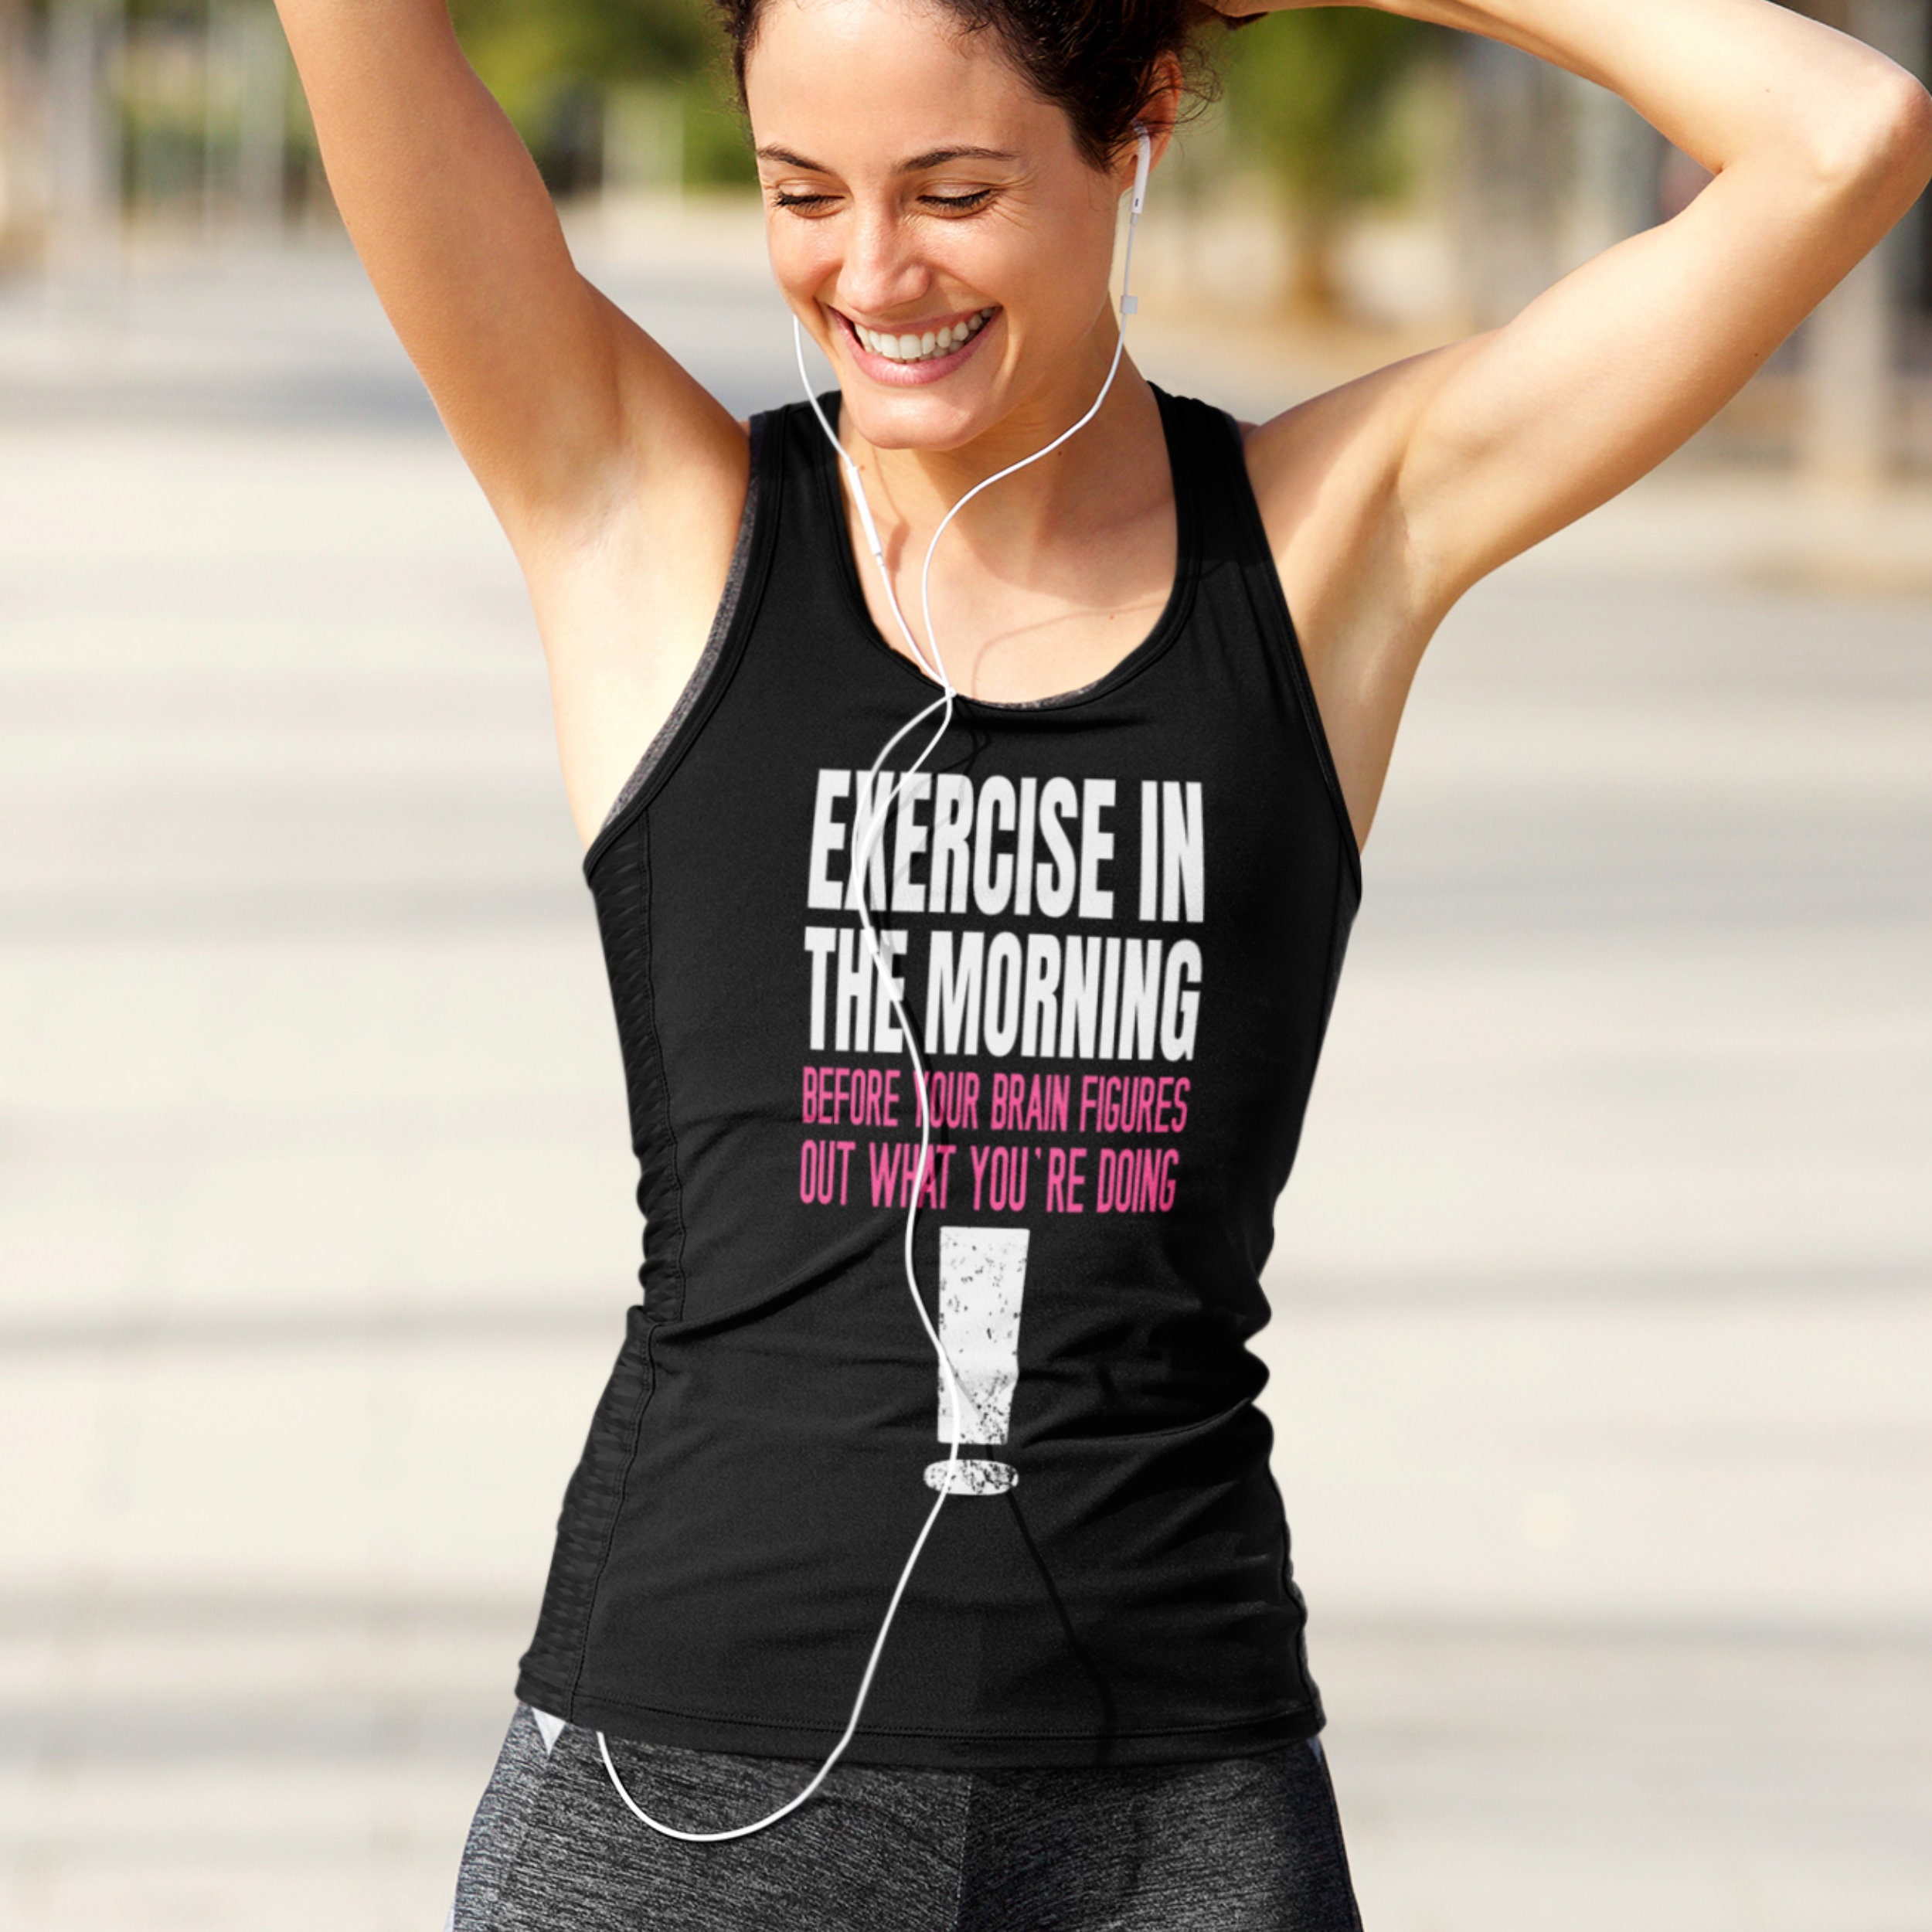 Funny Workout Tanks for Ladies, Fitness Shirt for Women, Workout Shirts, Exercise  Shirt, Gift for Women -  Denmark